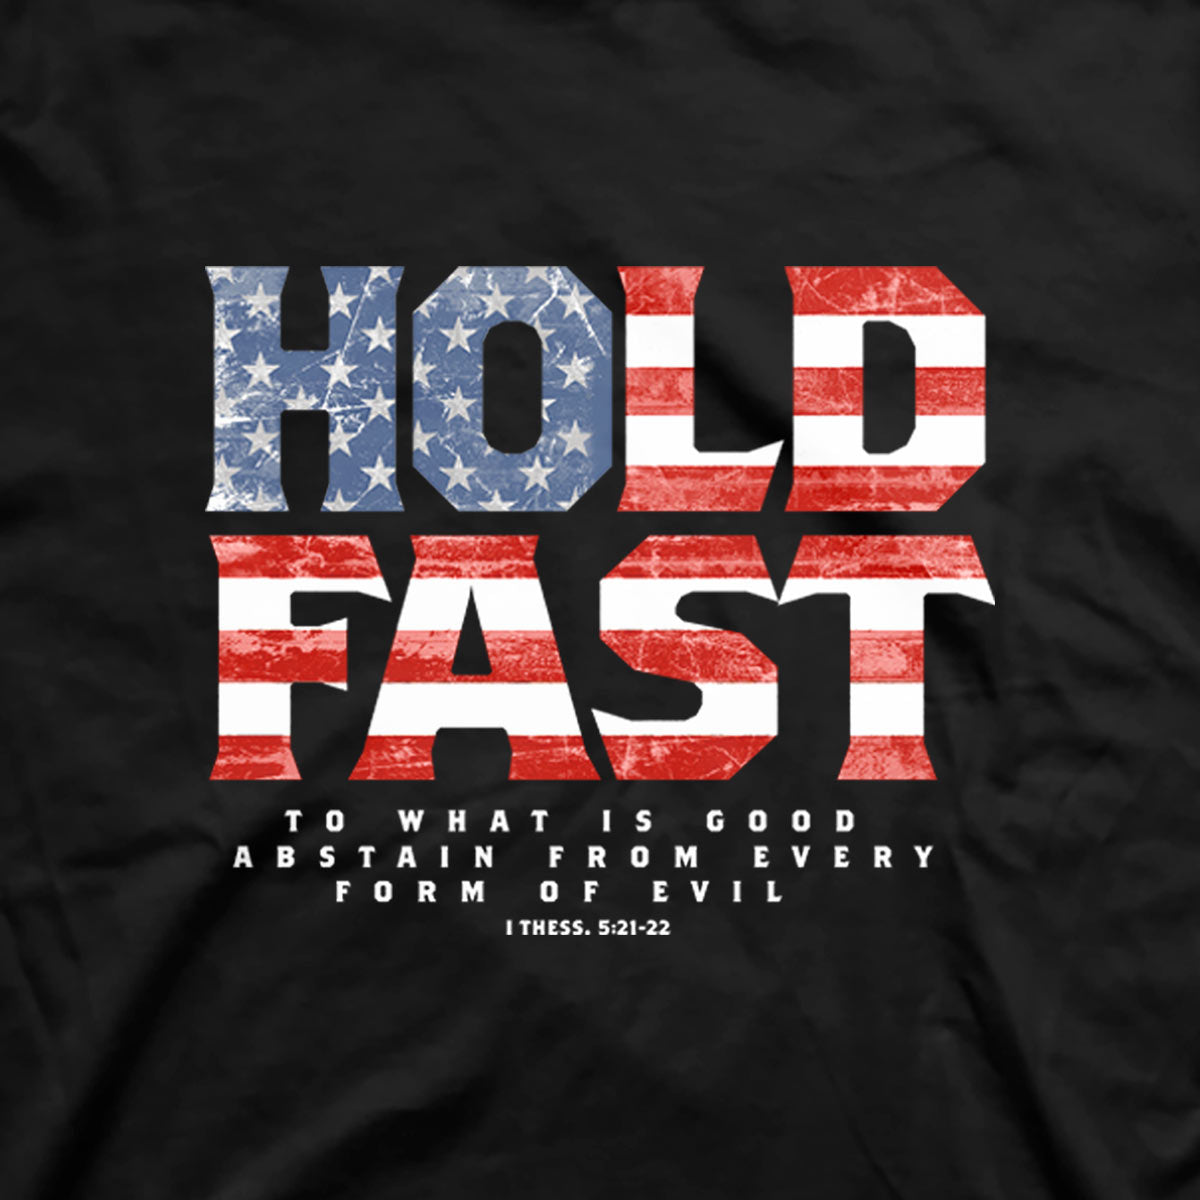 HOLD FAST Mens T-Shirt Hold Fast Flag